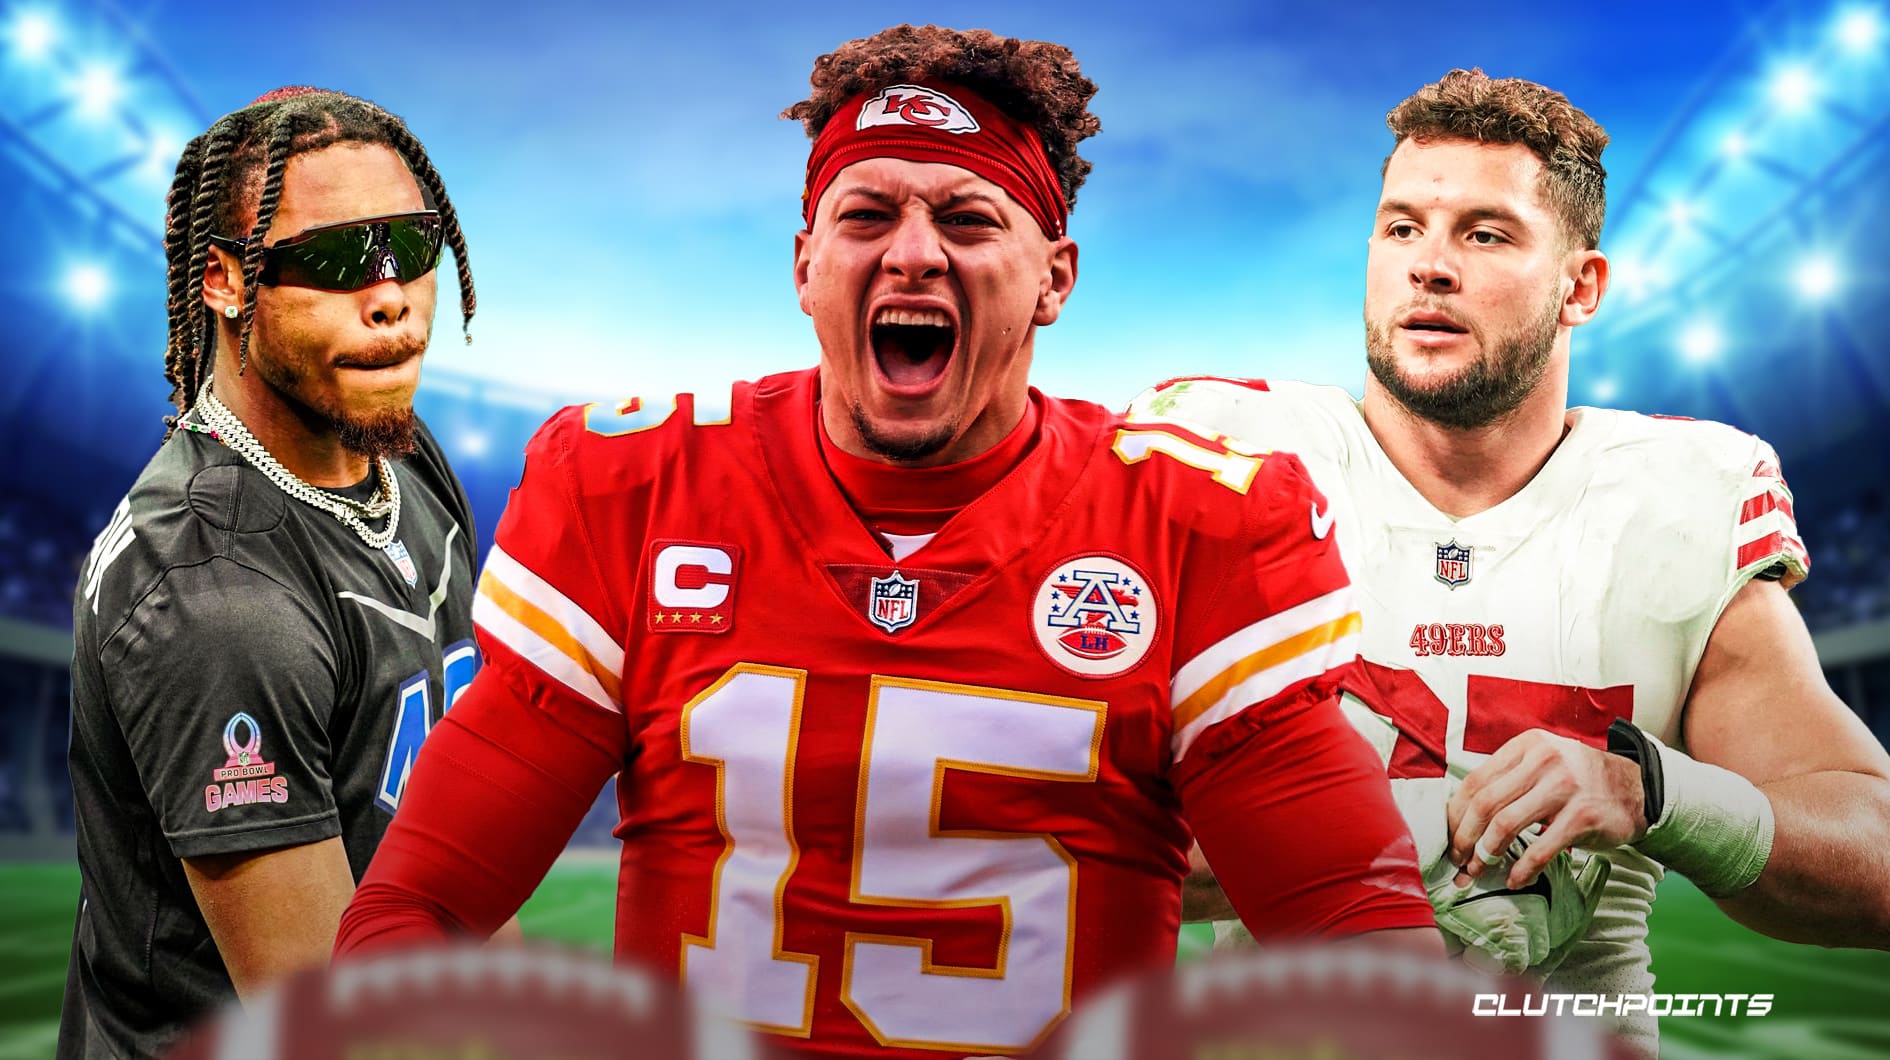 How to Watch the NFL Pro Bowl 2023